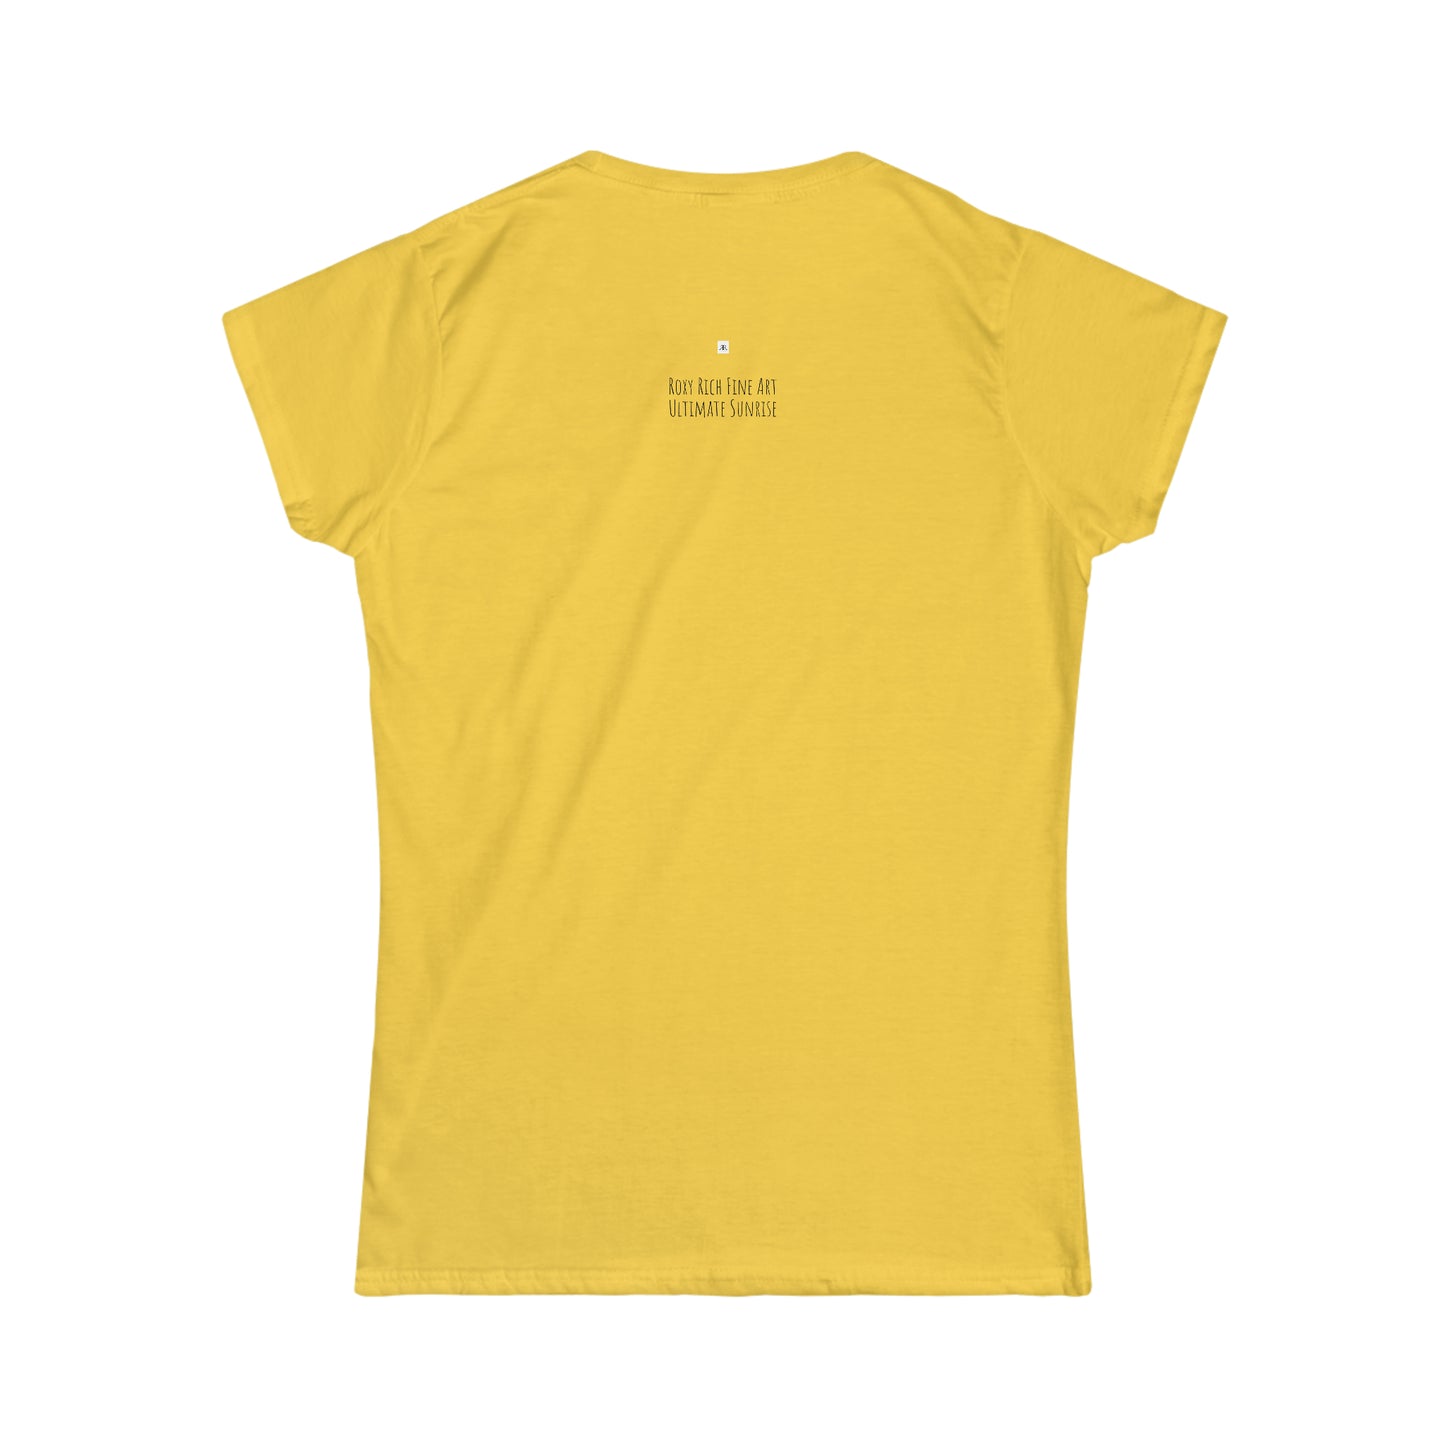 Ultimate Sunrise "TEMECULA" Women's Softstyle  Semi-Fitted Tee